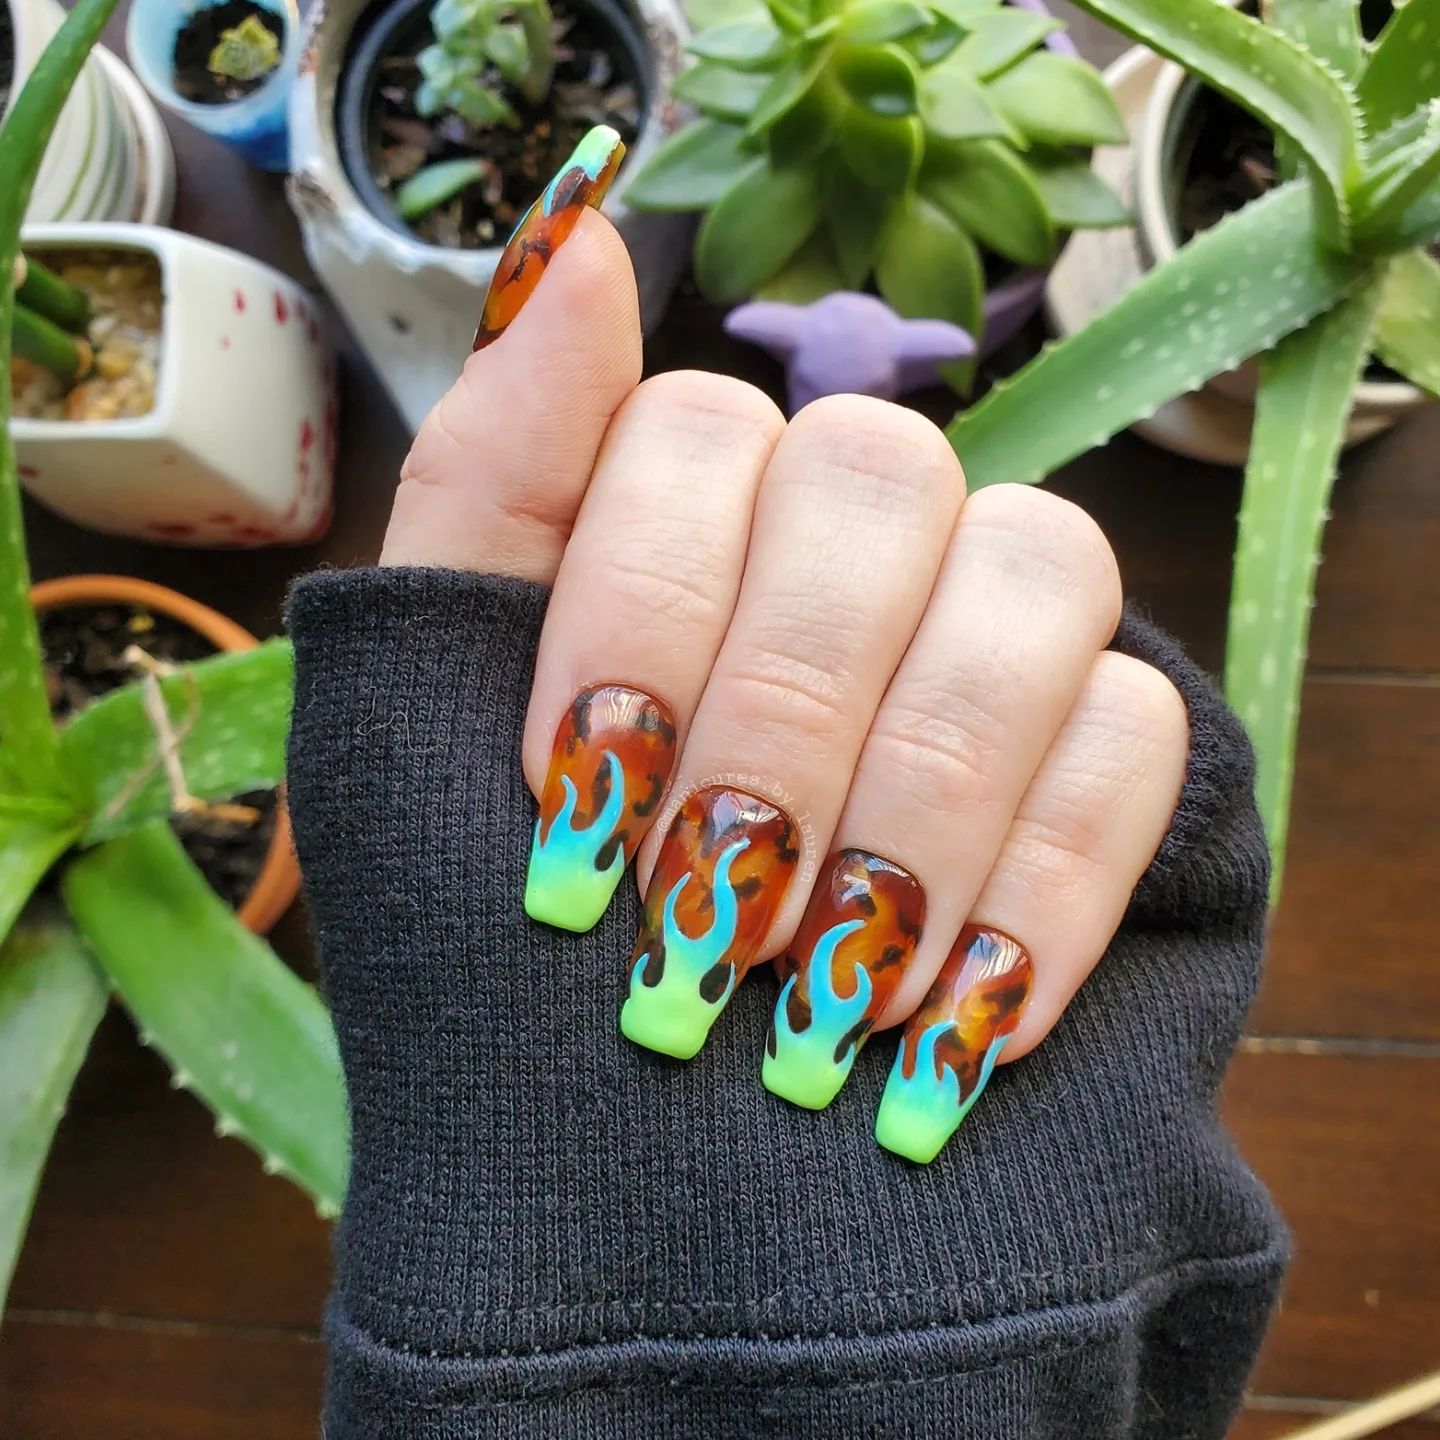  Here is an another amazing tortoiseshell nail idea with flames. This time the color of flames is blue and yellow combo. Your long square nails will achieve a cool look if you apply this nail art.